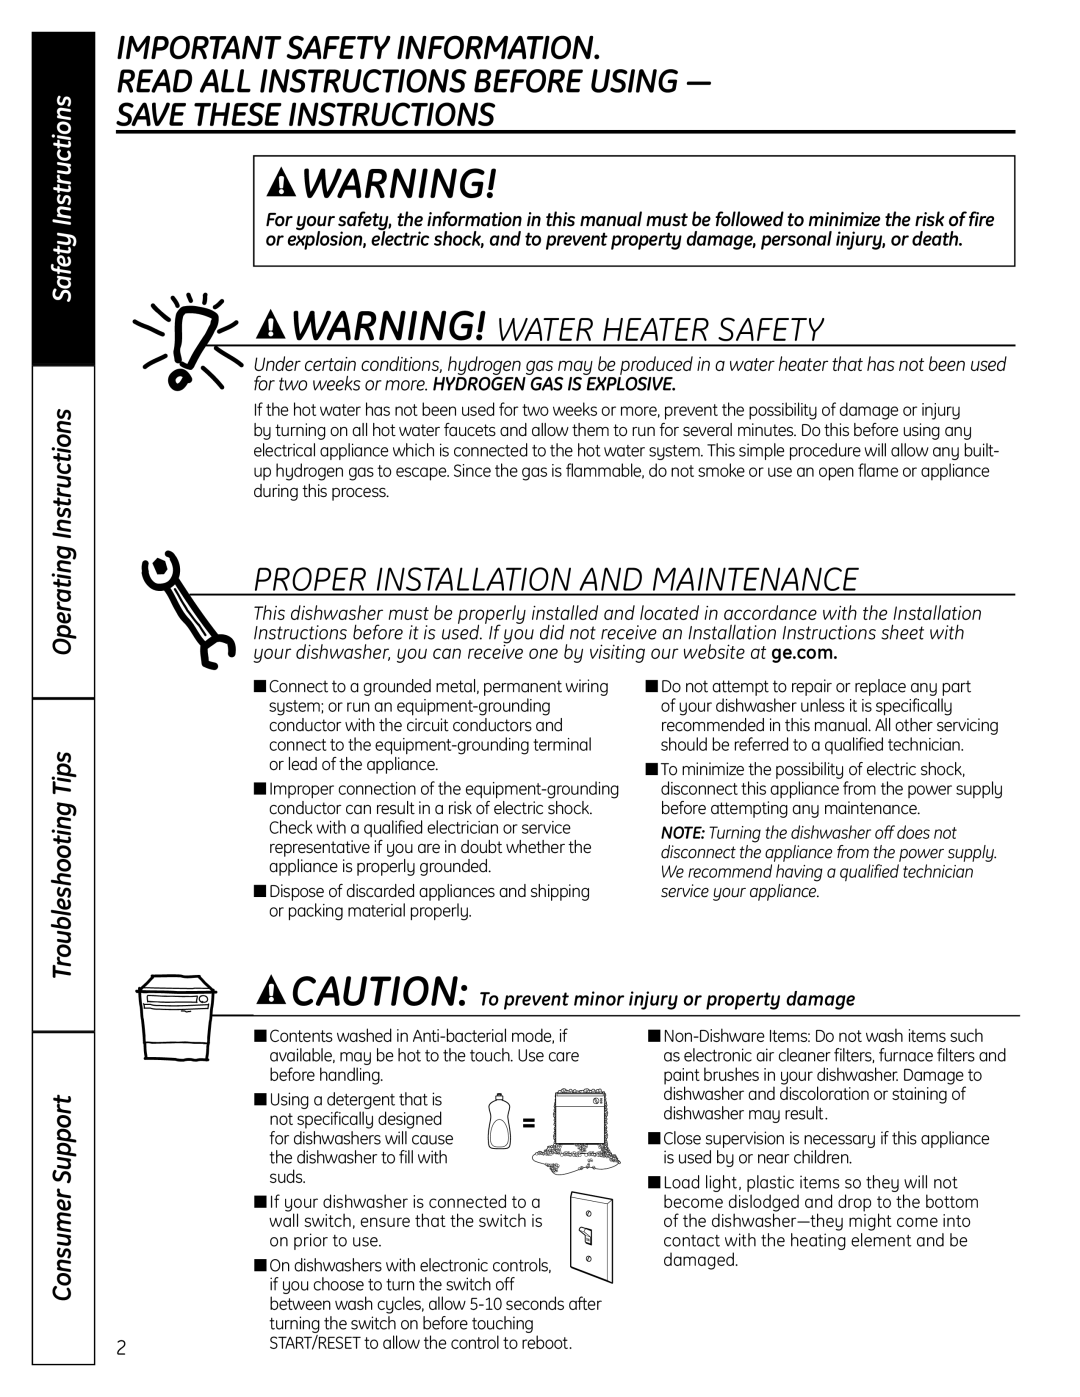 GE PDW8900 Series owner manual Important Safety Information, Read All Instructions Before Using, Save These Instructions 